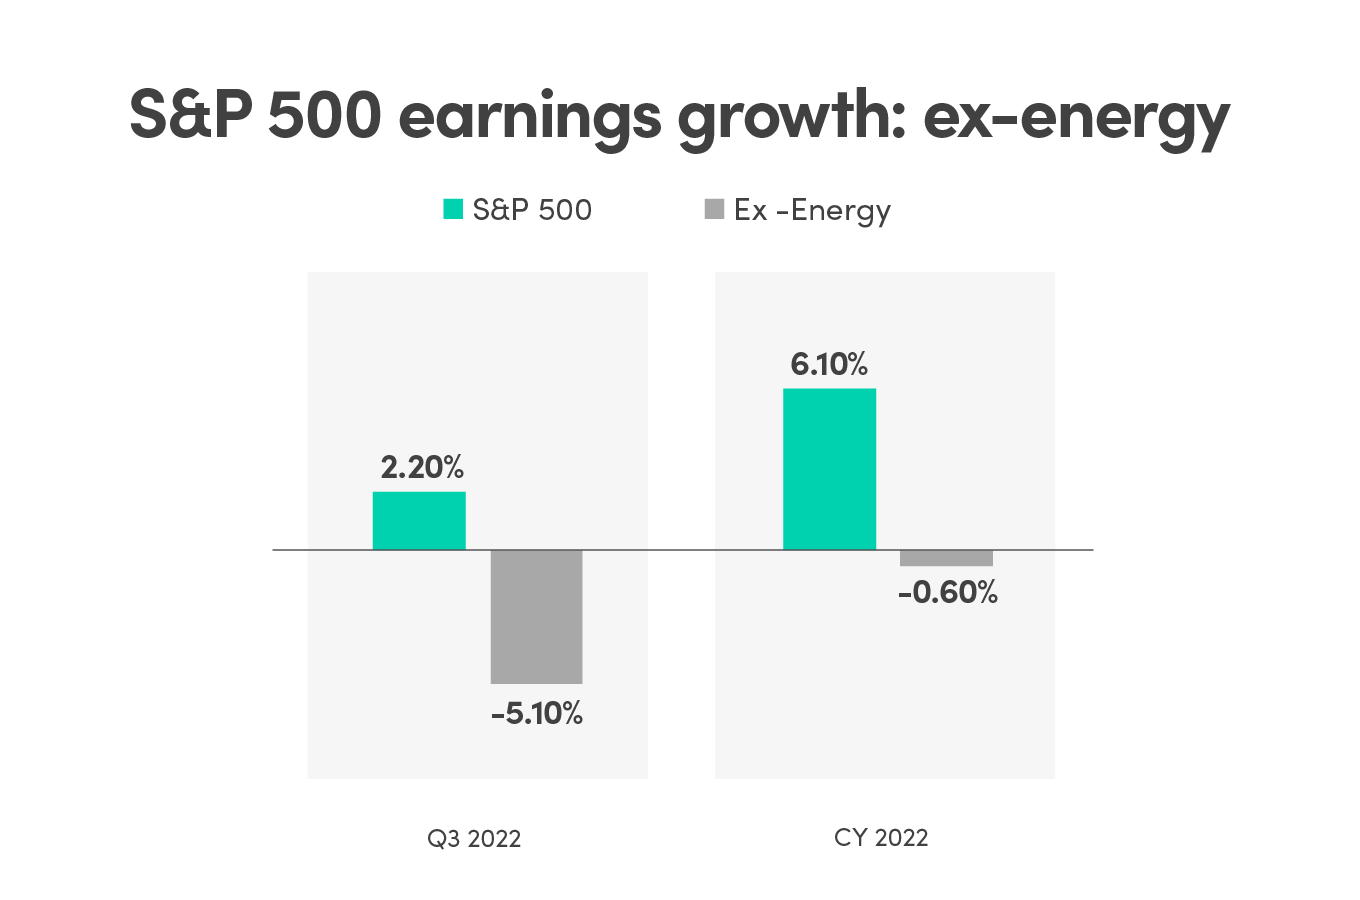 Comparison graph of S&P earnings growth and Ex-Energy in Q3 2022 and CY 2022